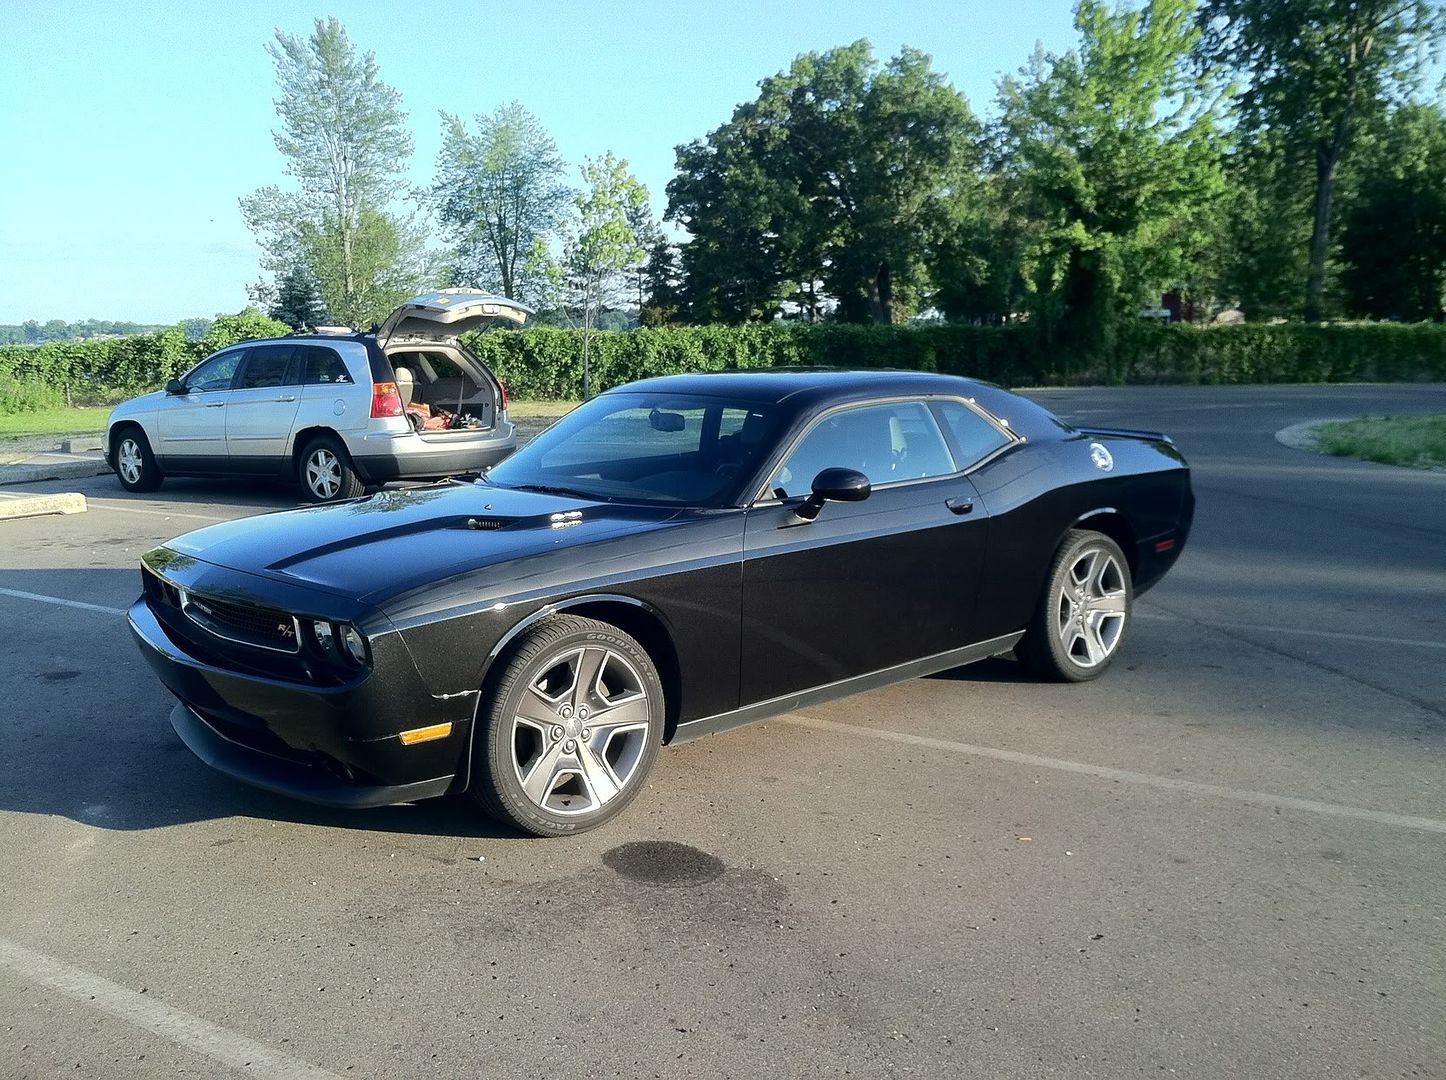 2011 Challenger Rt Plus Review